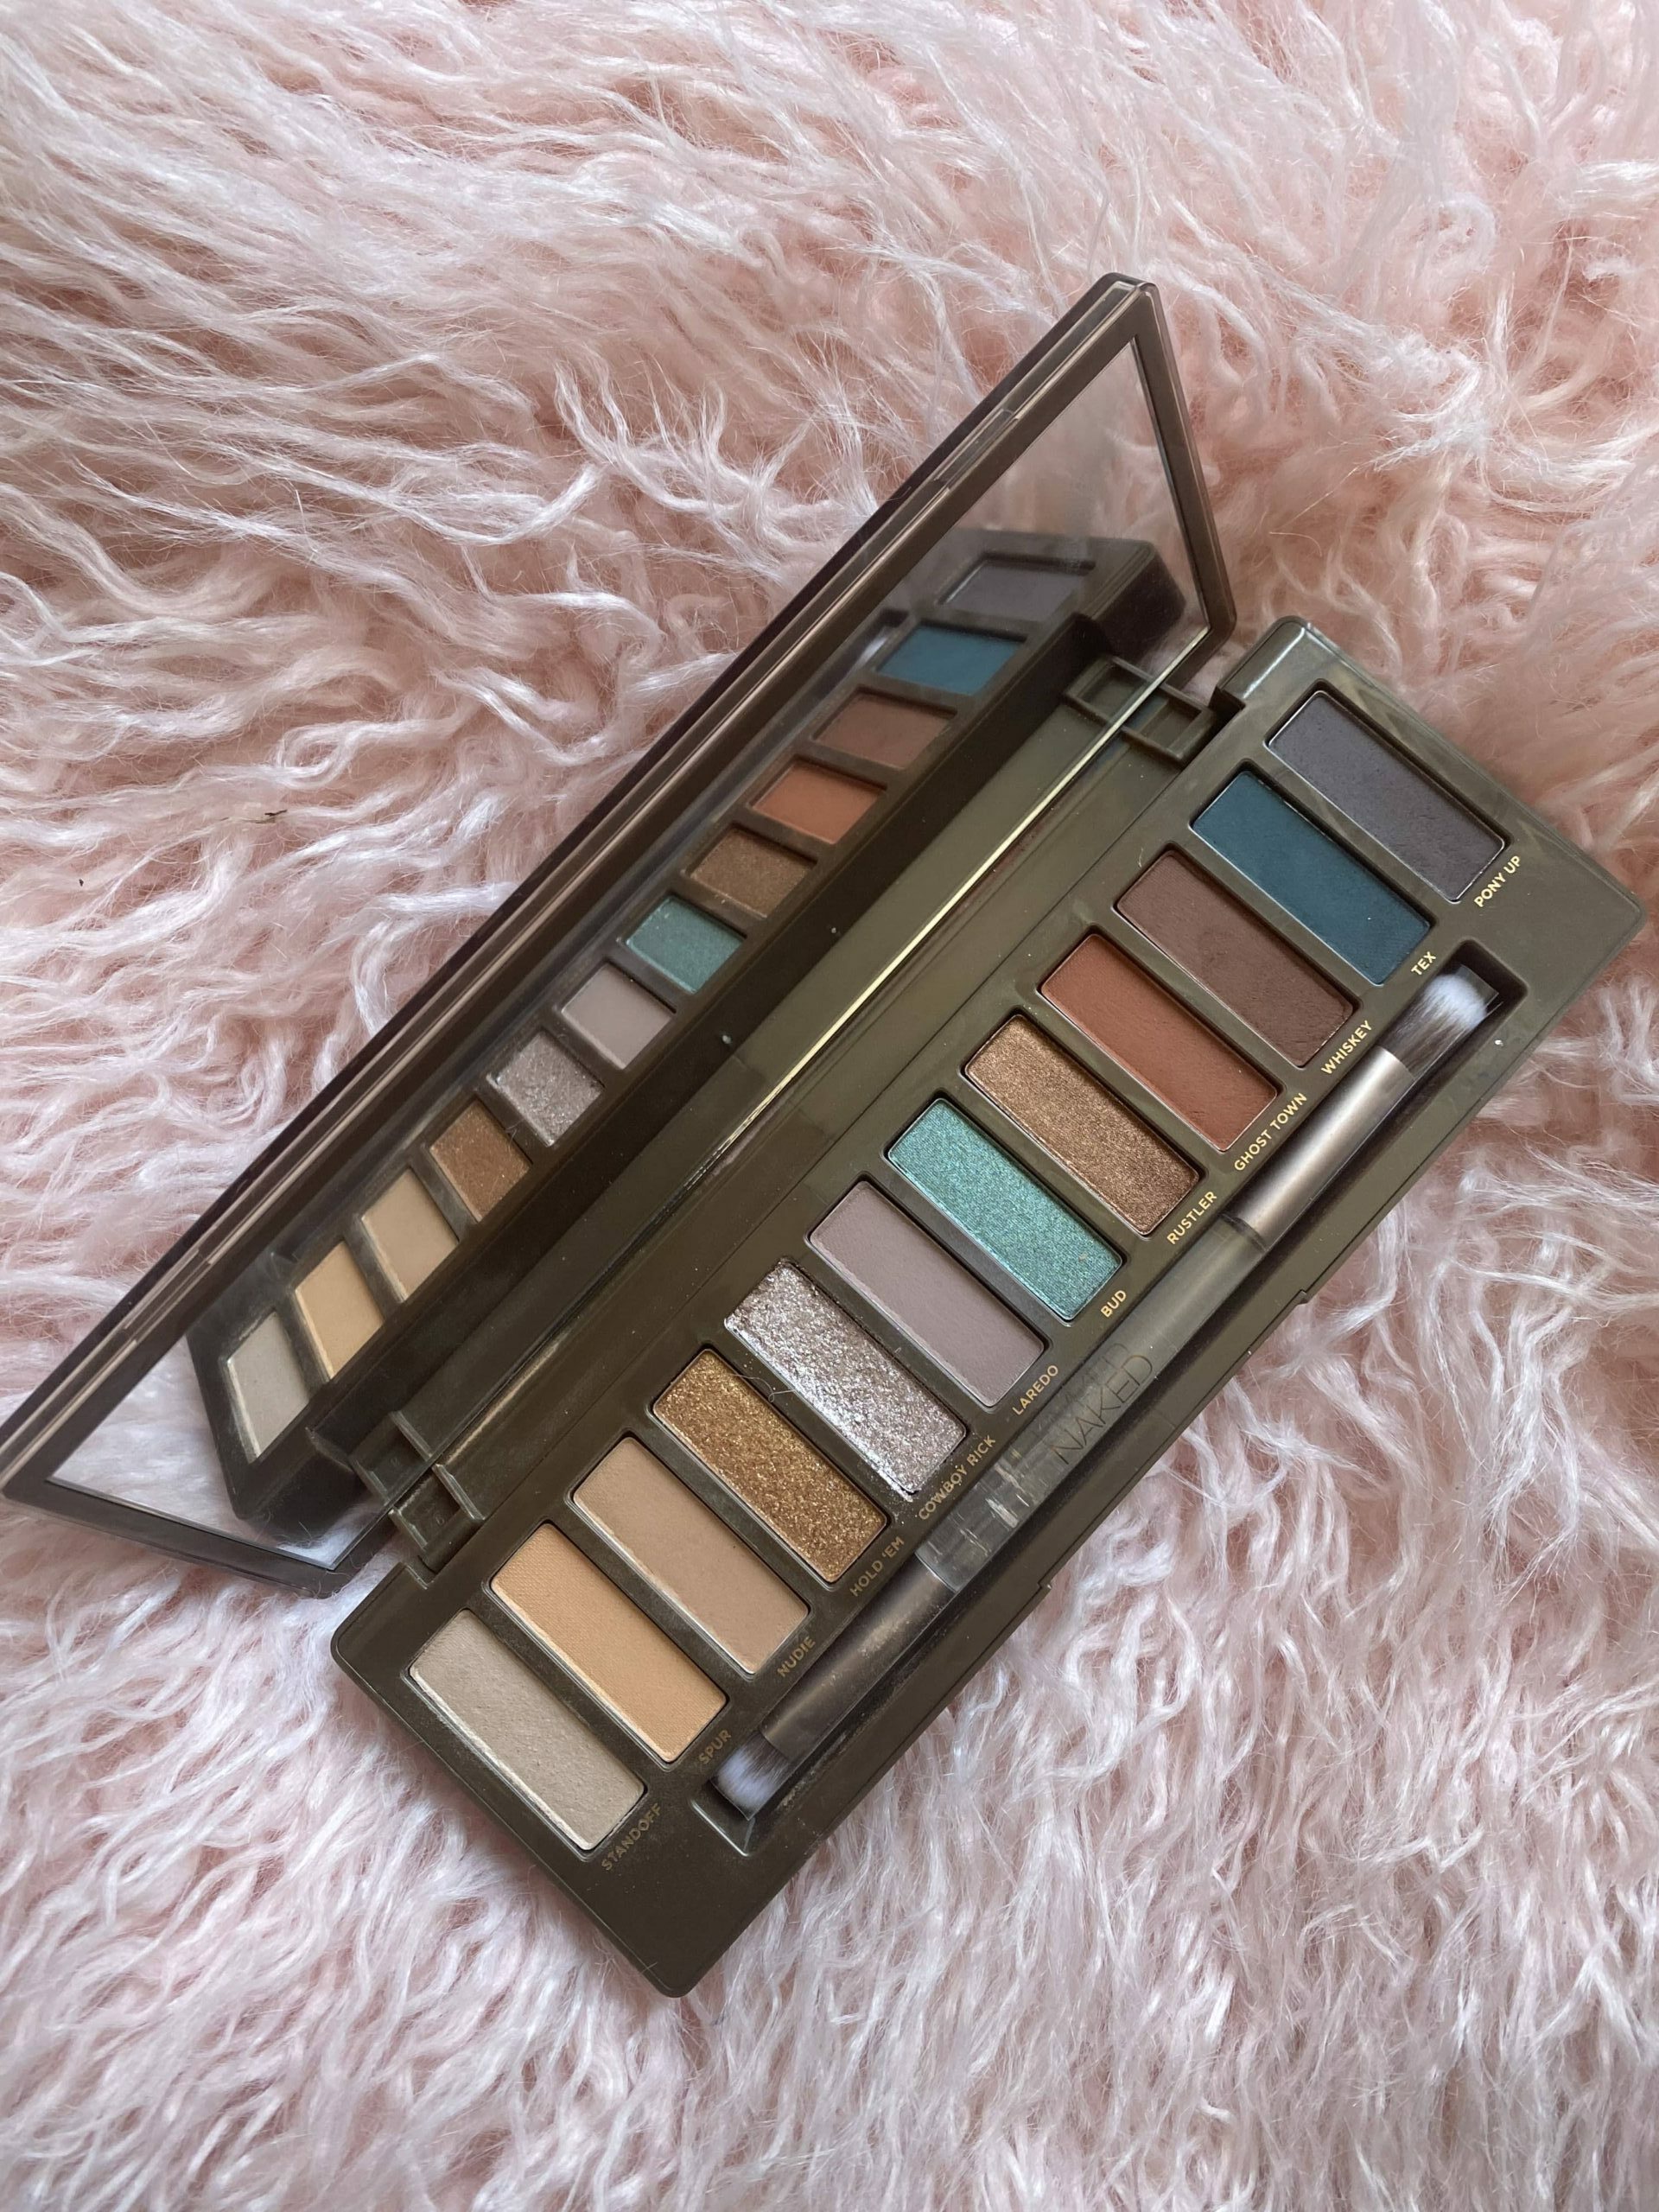 Urban Decay Wild West Palette Review